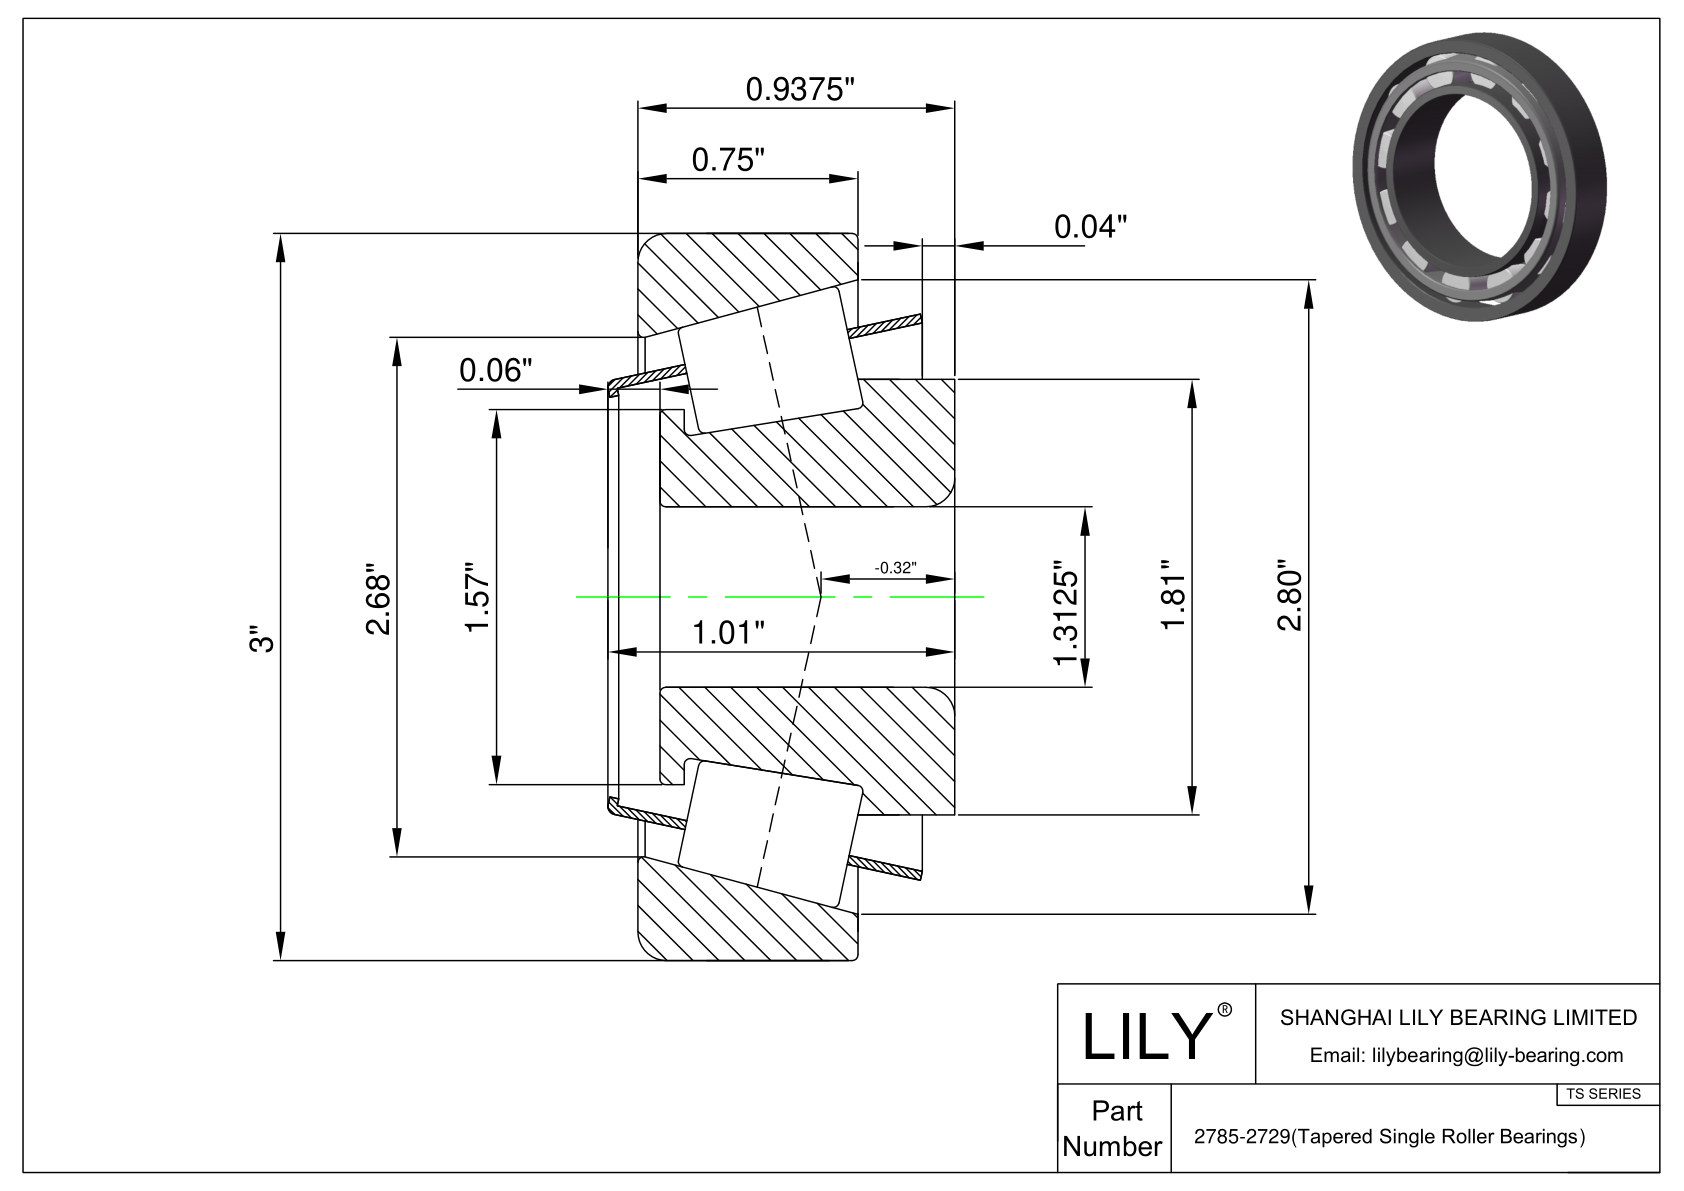 2785-2729 TS (Tapered Single Roller Bearings) (Imperial) cad drawing